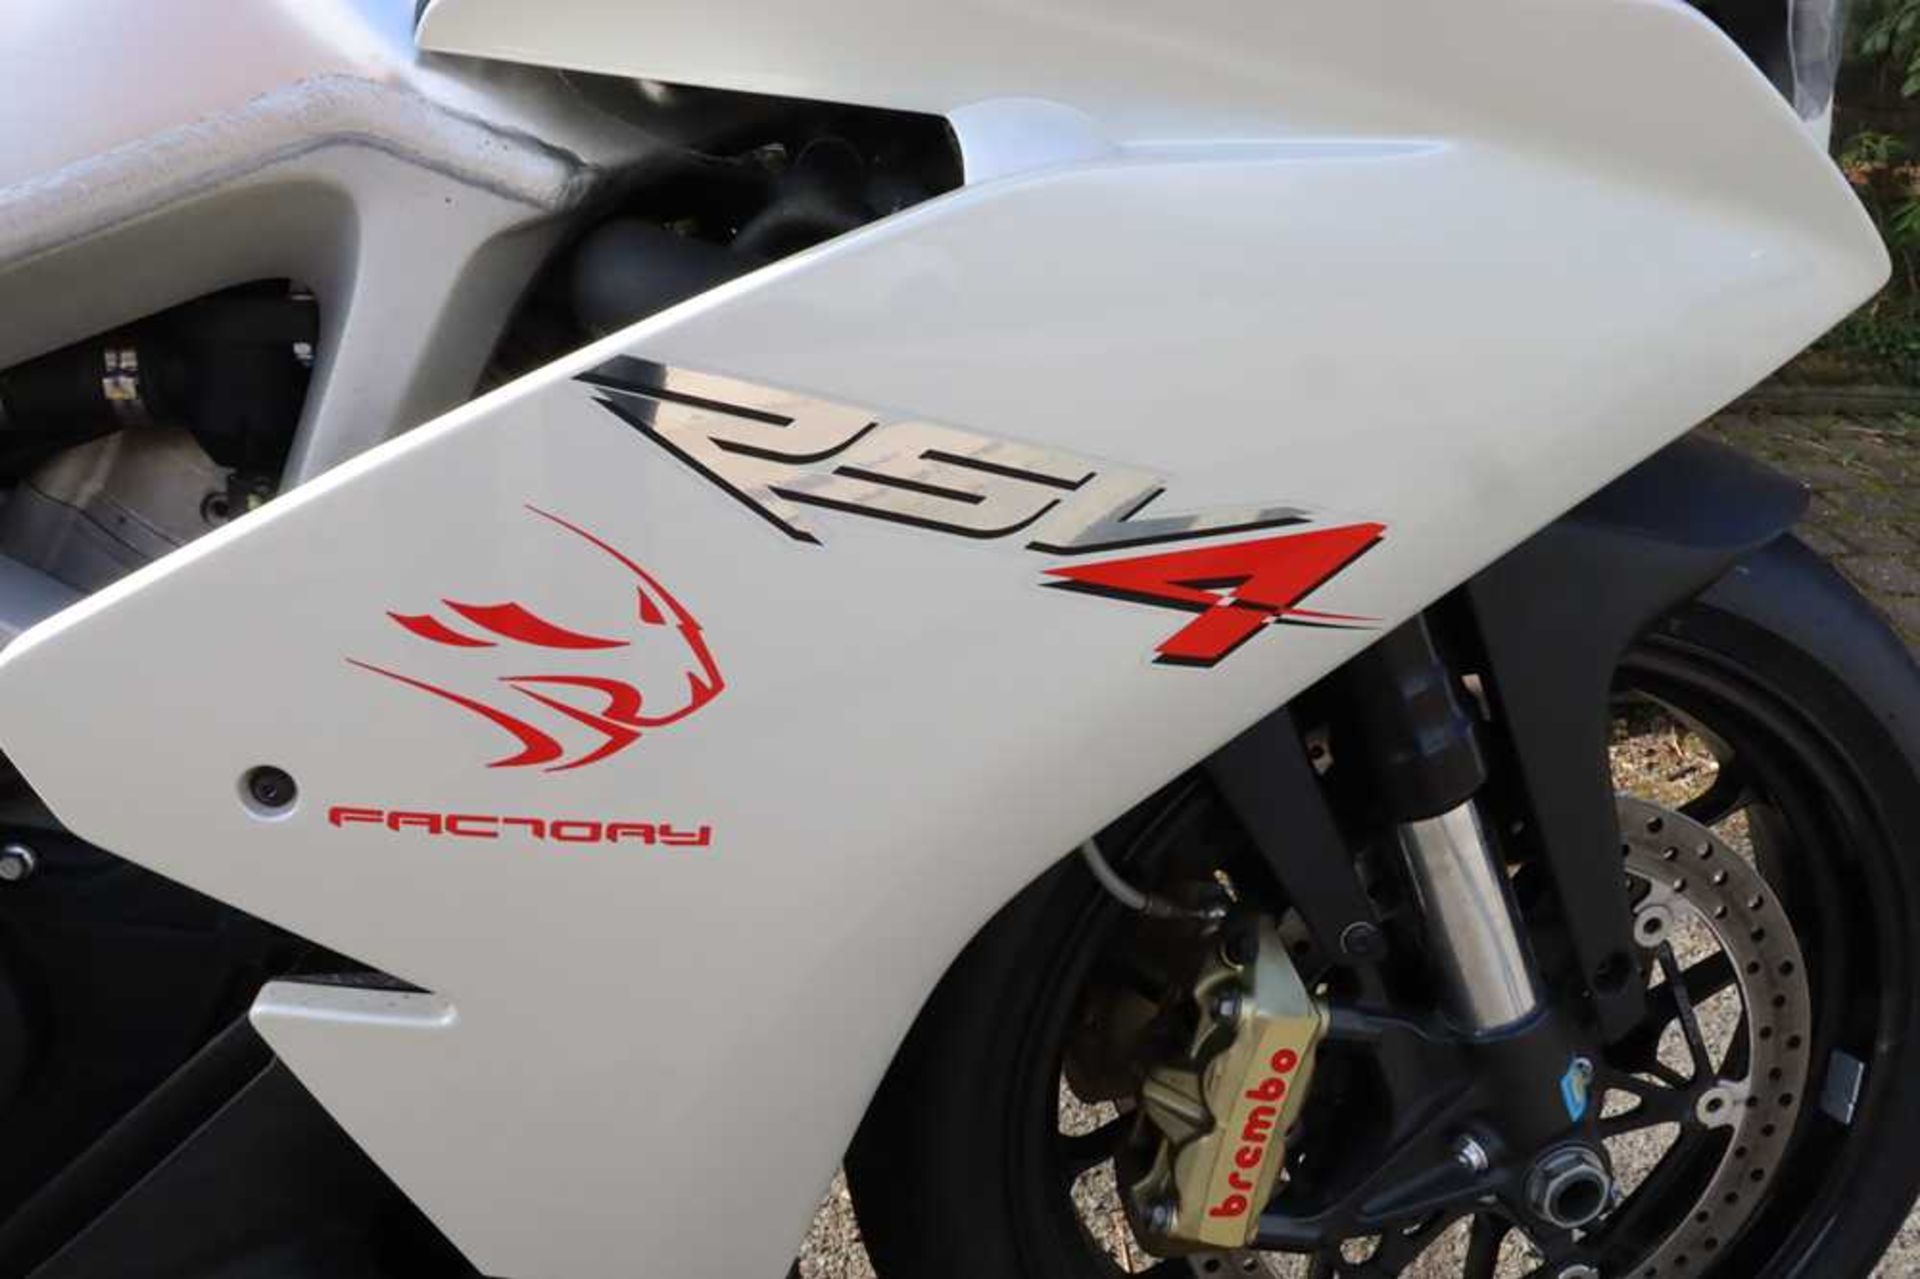 2010 Aprilia RSV4R Fitted with Moto GP style exhaust, original included - Image 8 of 44